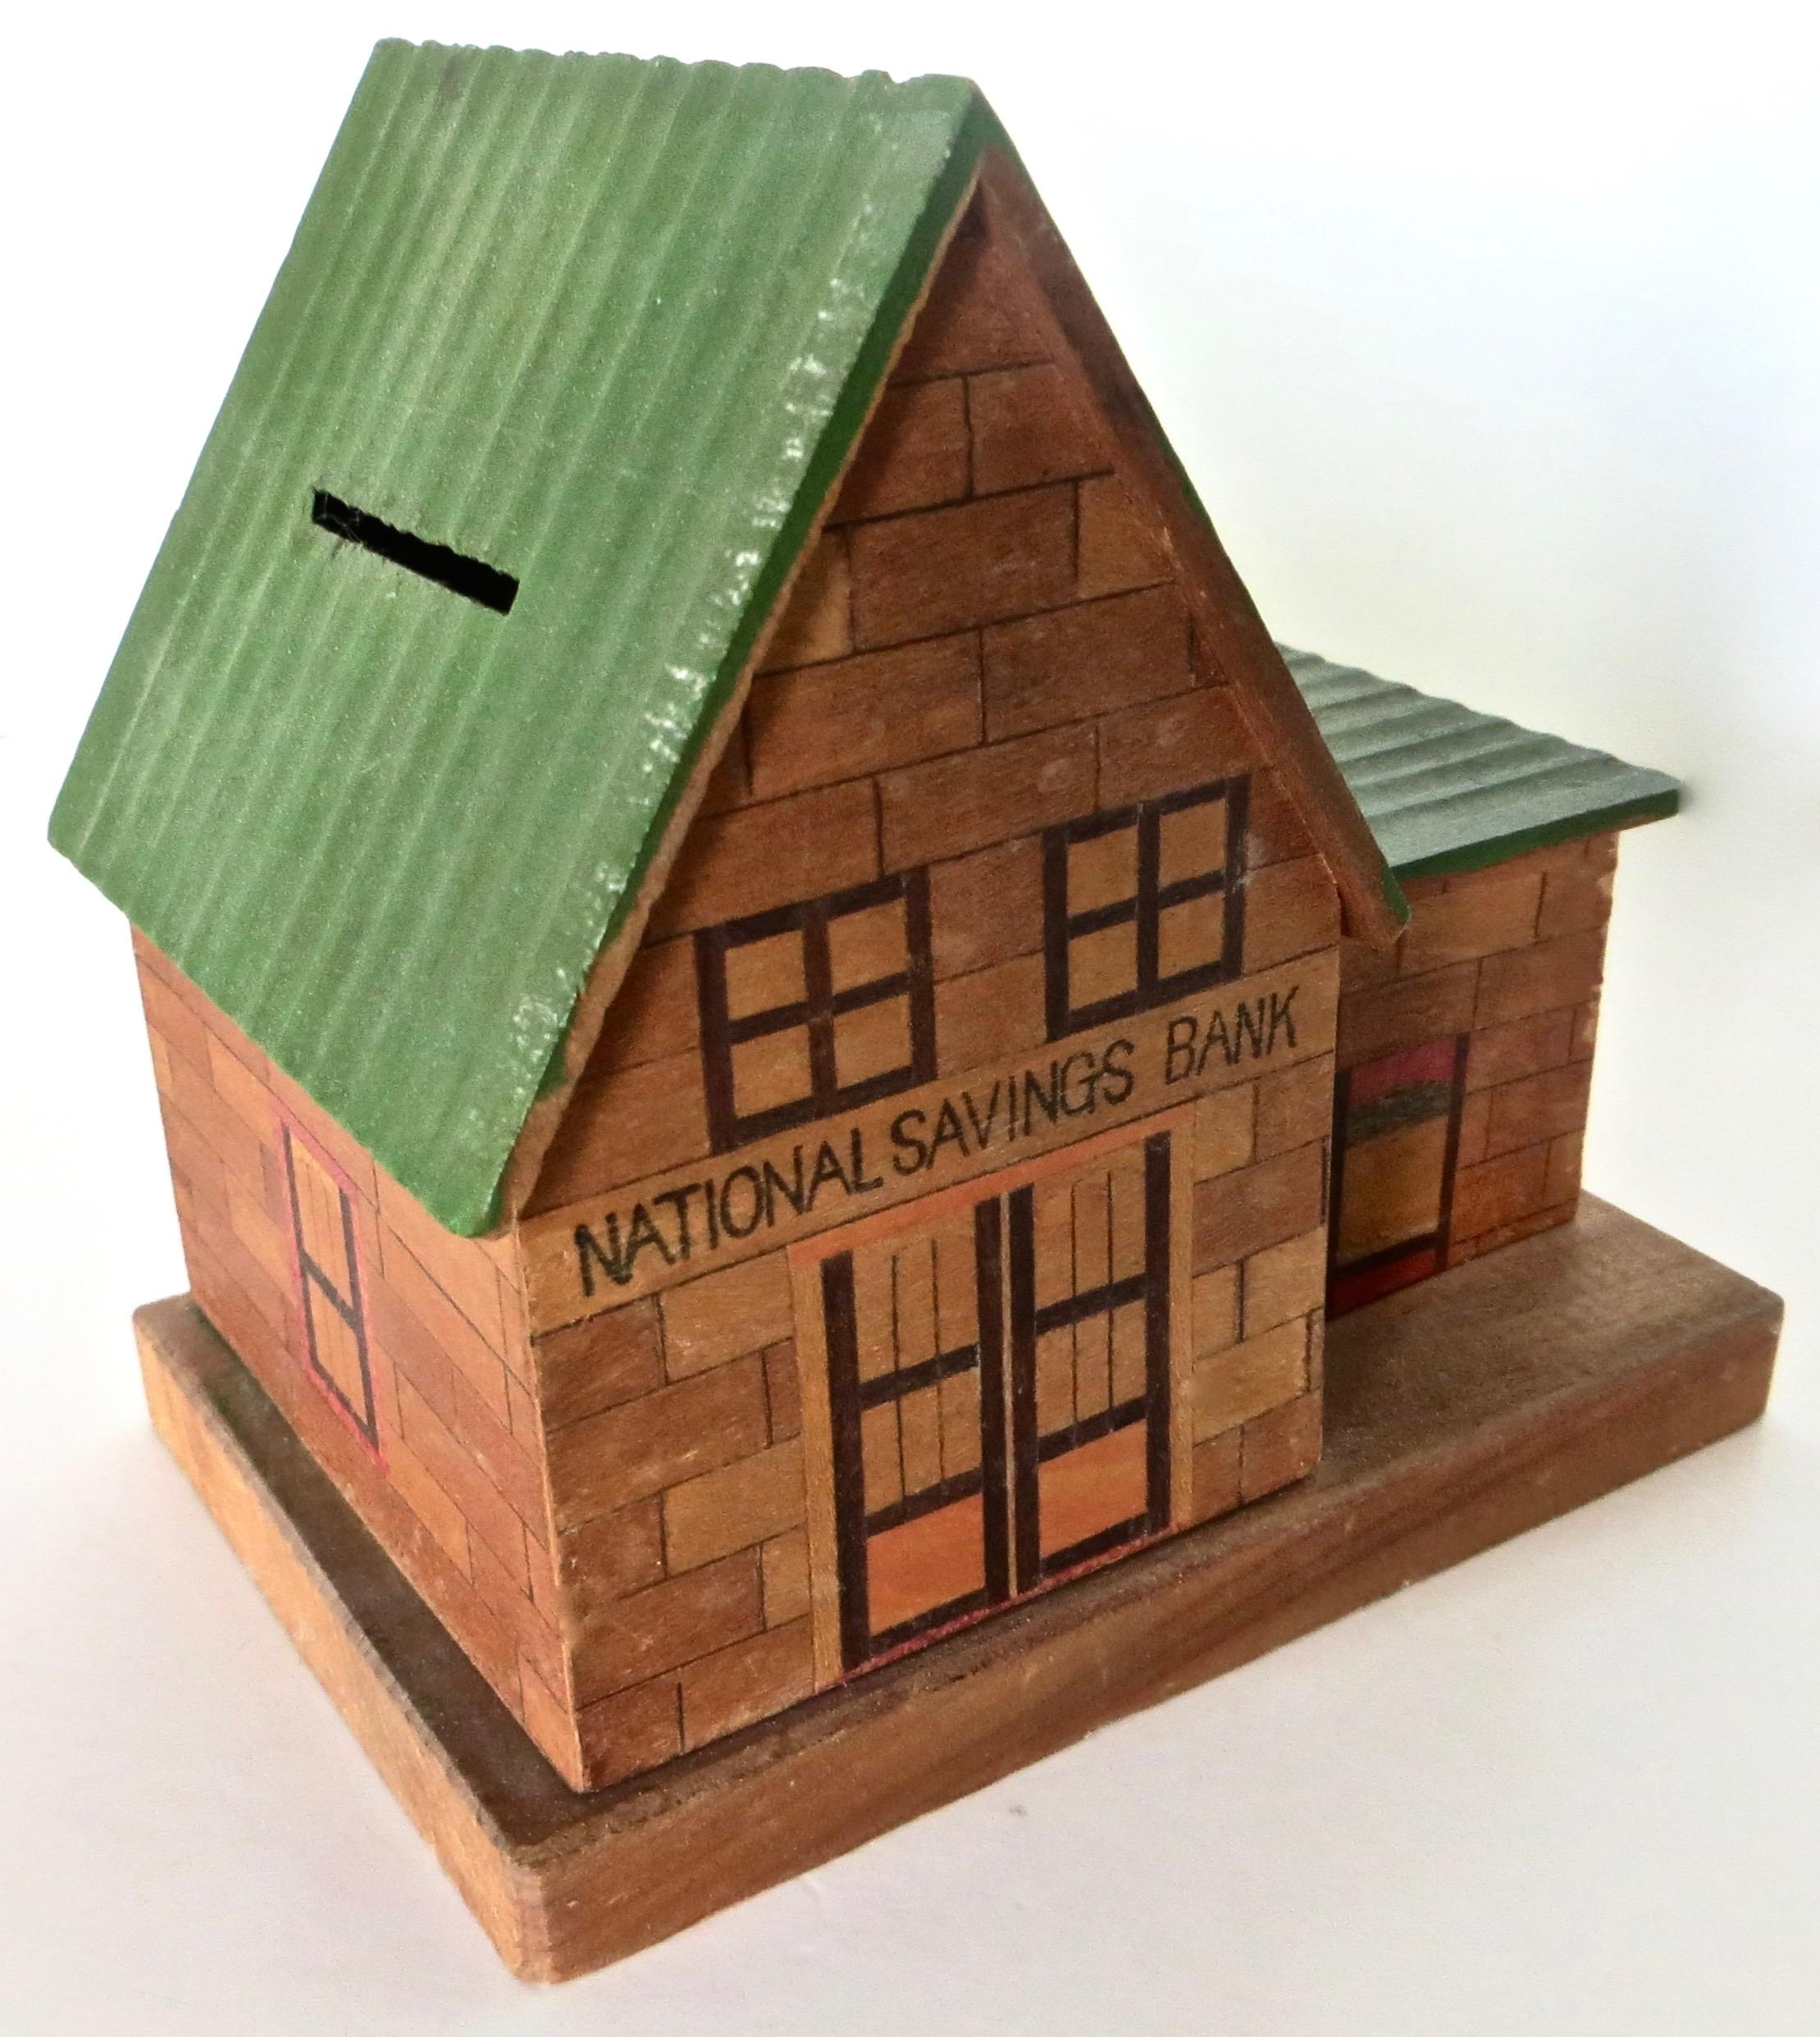 Quite an unusual piece for bank collectors or just for those seeking a unique collectible. This is a coin bank made of all wood; walnut and inlay here and there with a green painted roof; portraying an institutional bank; in this case, 